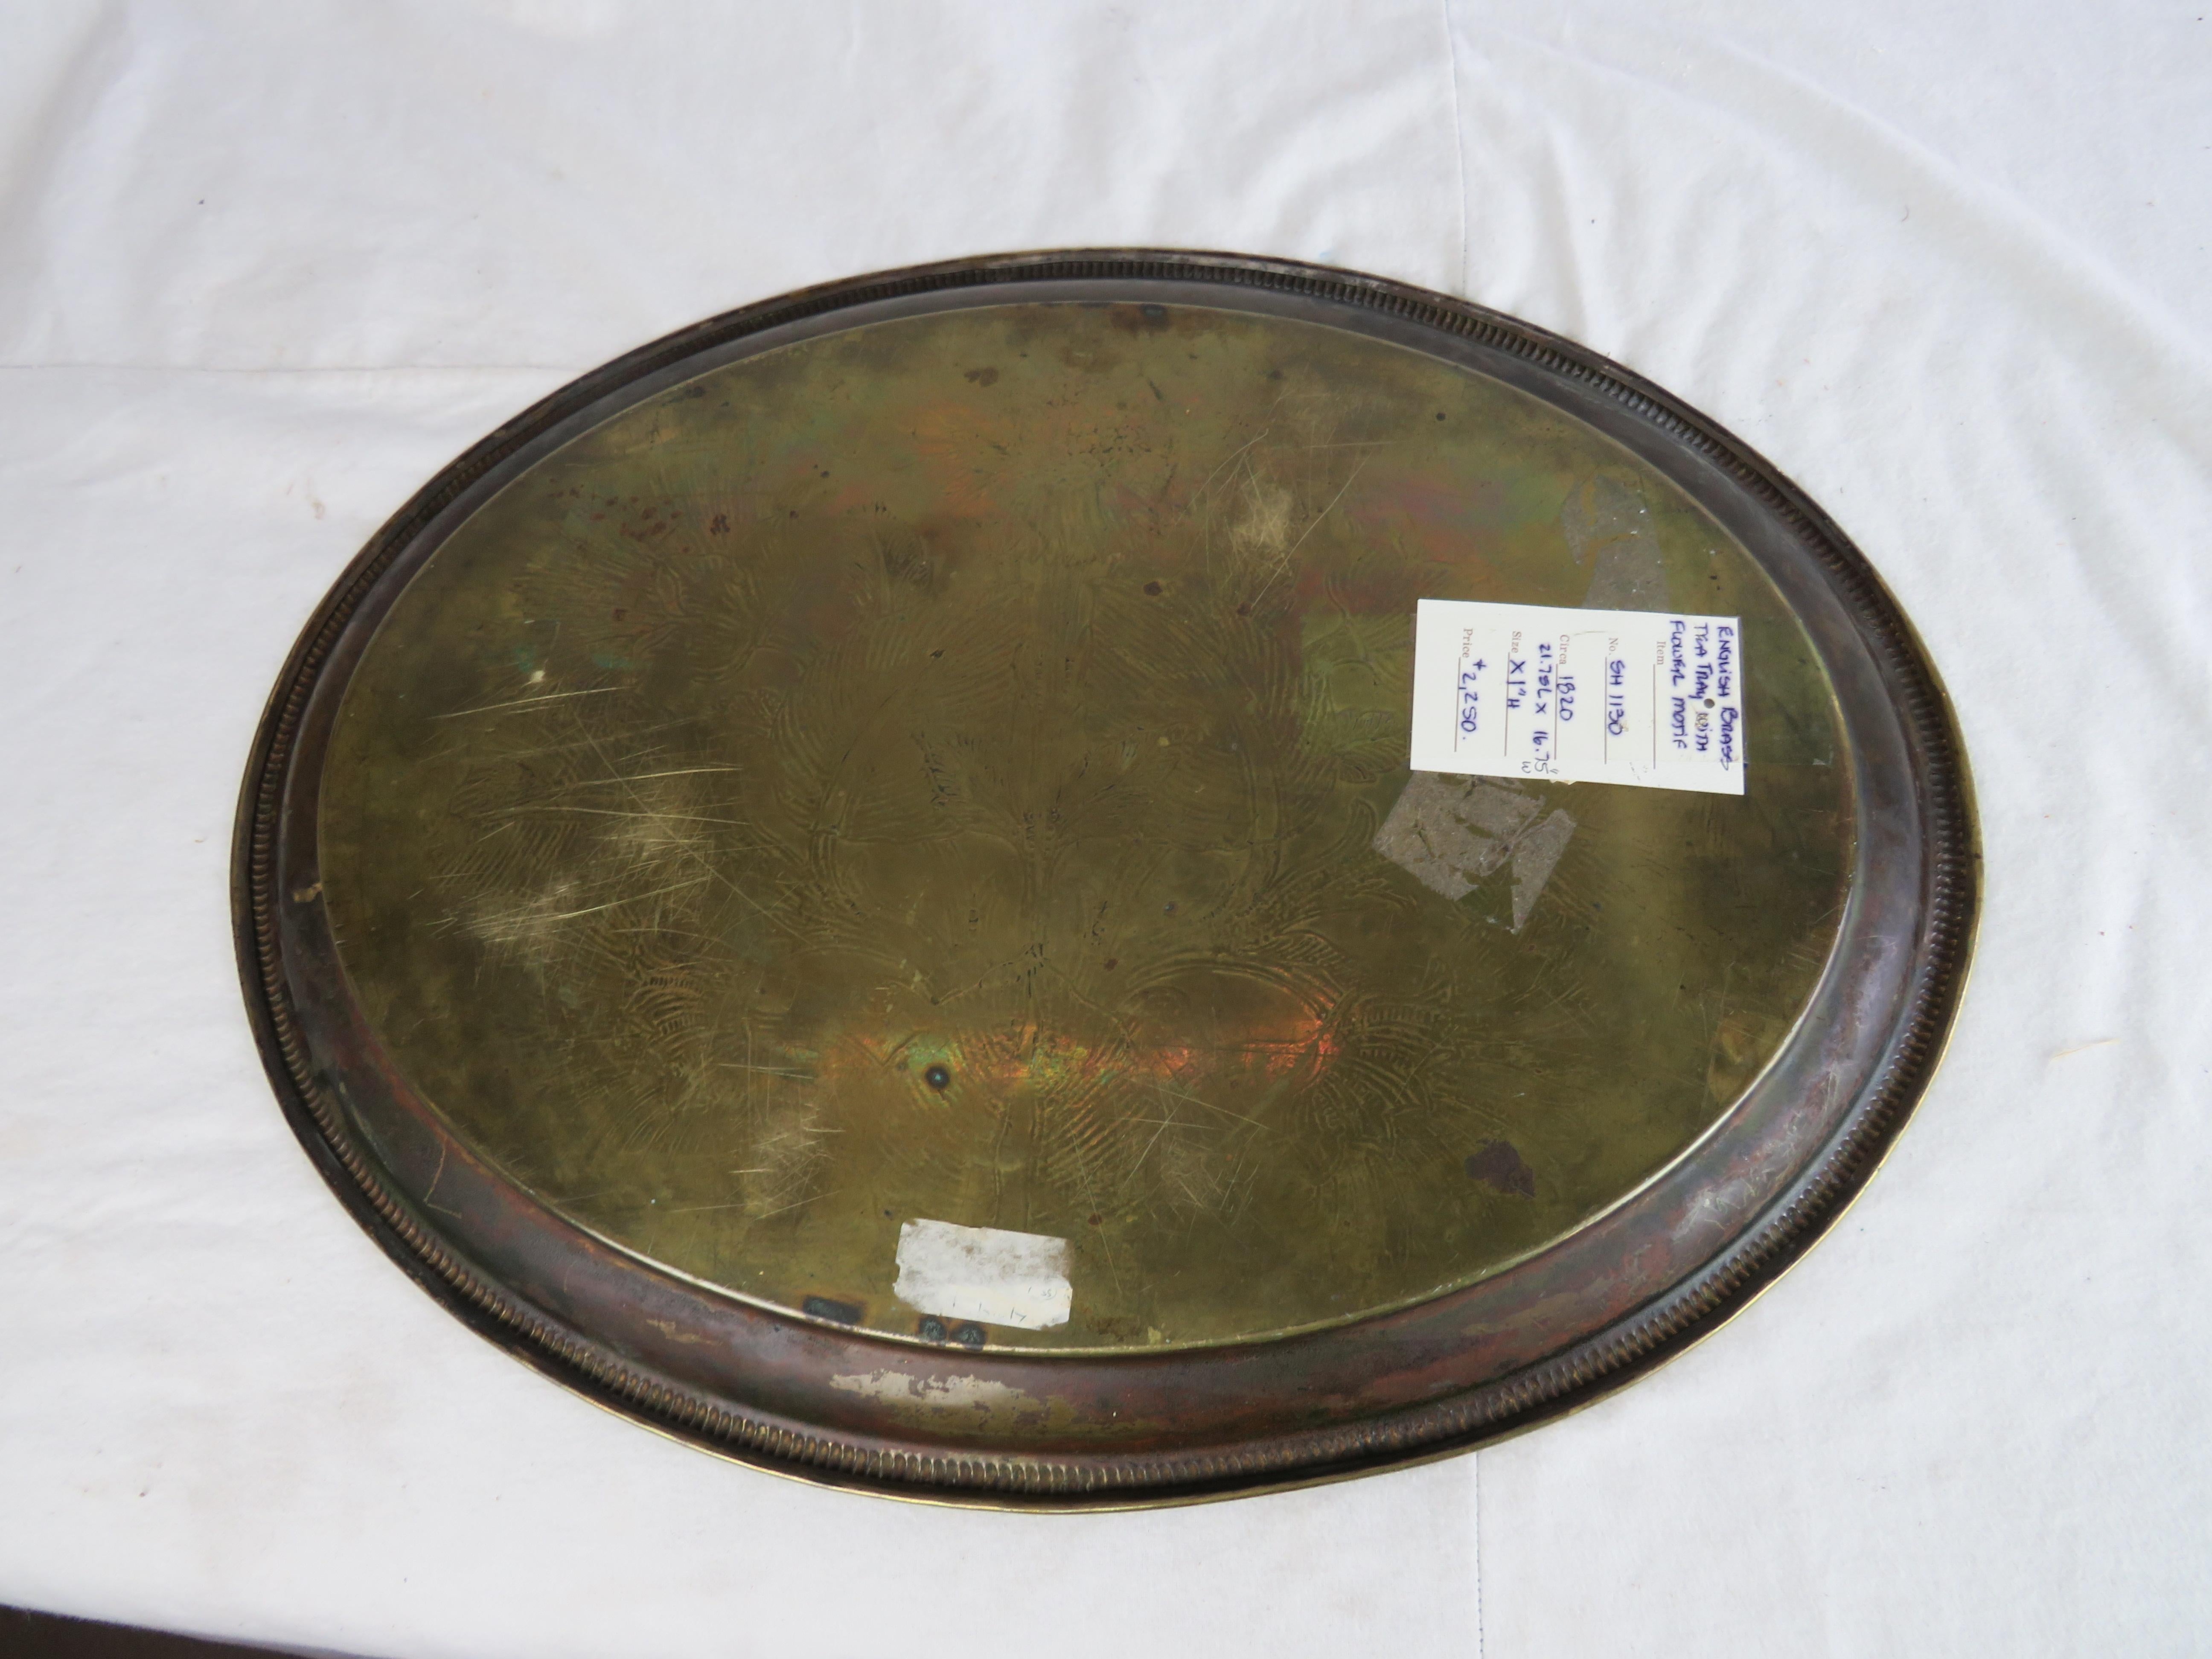 Oval form brass serving/tea tray with reeded edge and central incised floral design, 19th century.